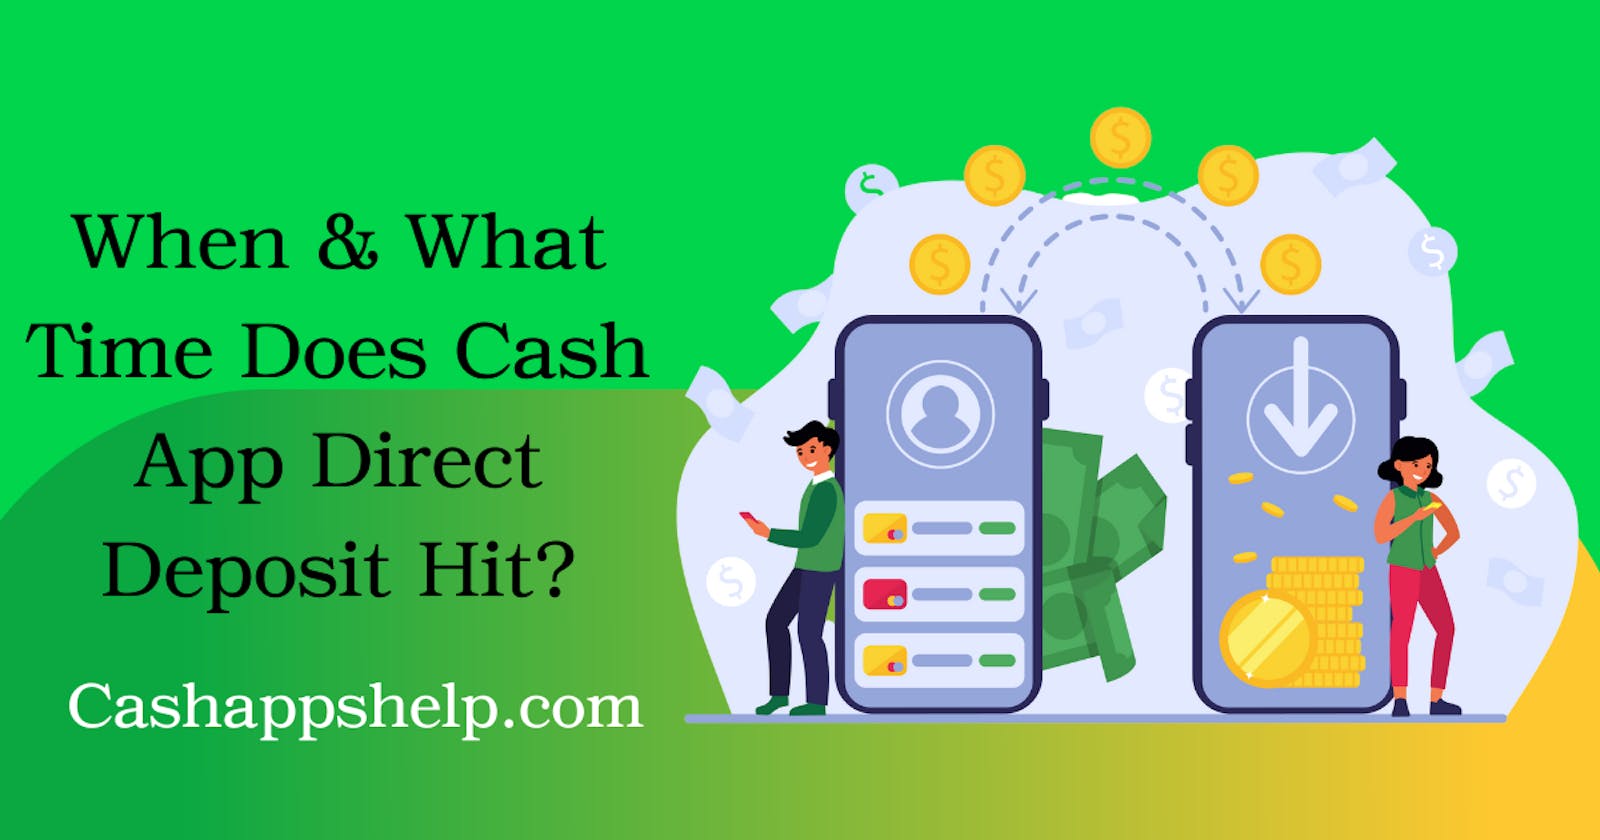 What Time Does Cash App Direct Deposit Hit, and why is it late?